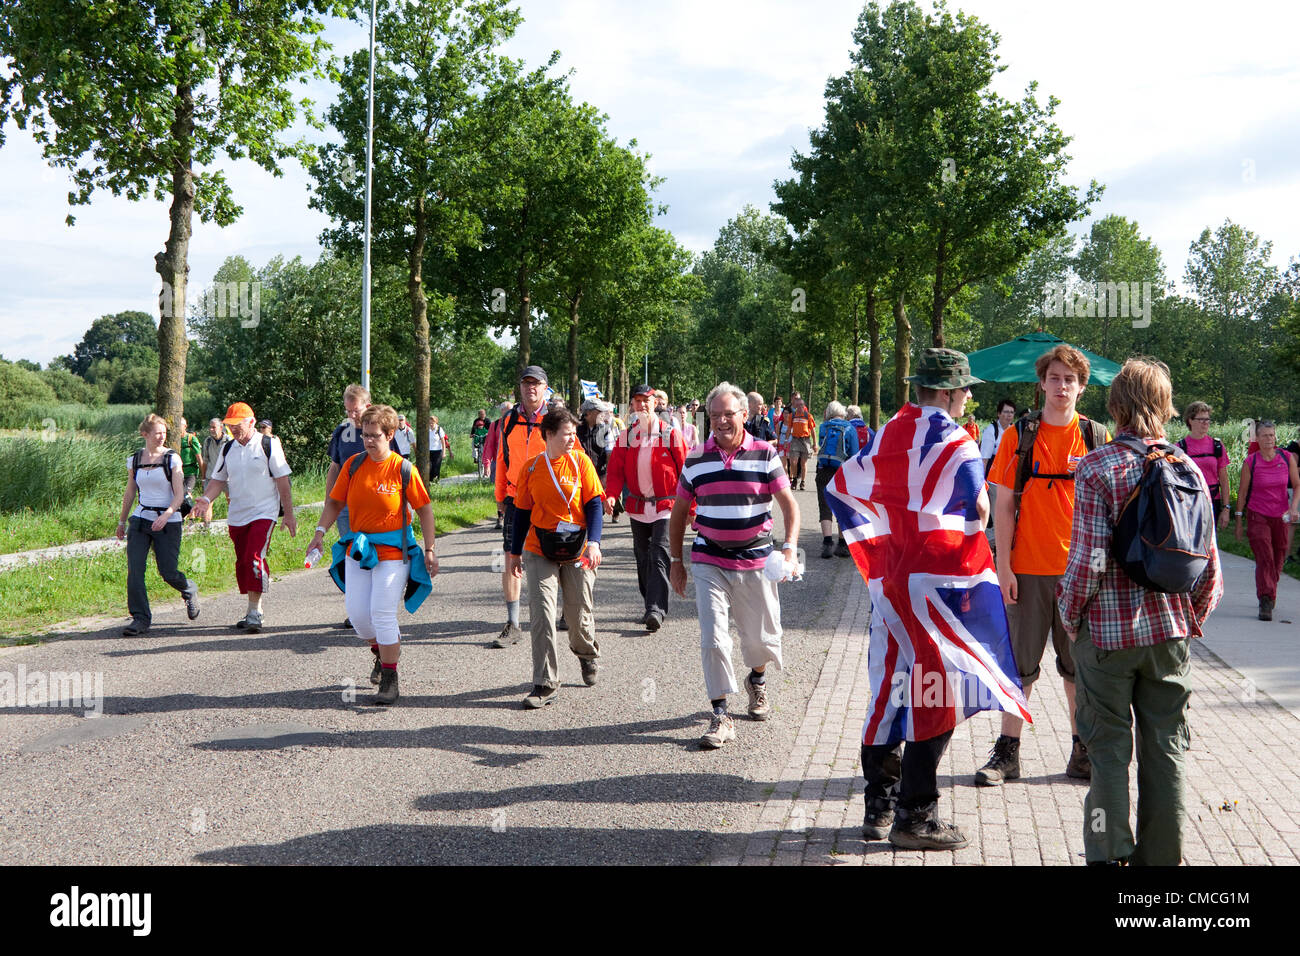 Wijchen, The Netherlands. 18th July, 2012. British contestants in the International Four Day Marches Nijmegen take a break while passing through Wijchen.   The Four Day Marches Nijmegen, also known as Vierdaagse is the largest marching event in the world. It is organised every year in Nijmegen in mid-July as a means of promoting sport and exercise. Participants walk 30, 40 or 50 kilometers daily, and on completion receive a royally approved medal (Vierdaagsekruis). The participants are mostly civilians, but there are also a few thousand military participants. Stock Photo